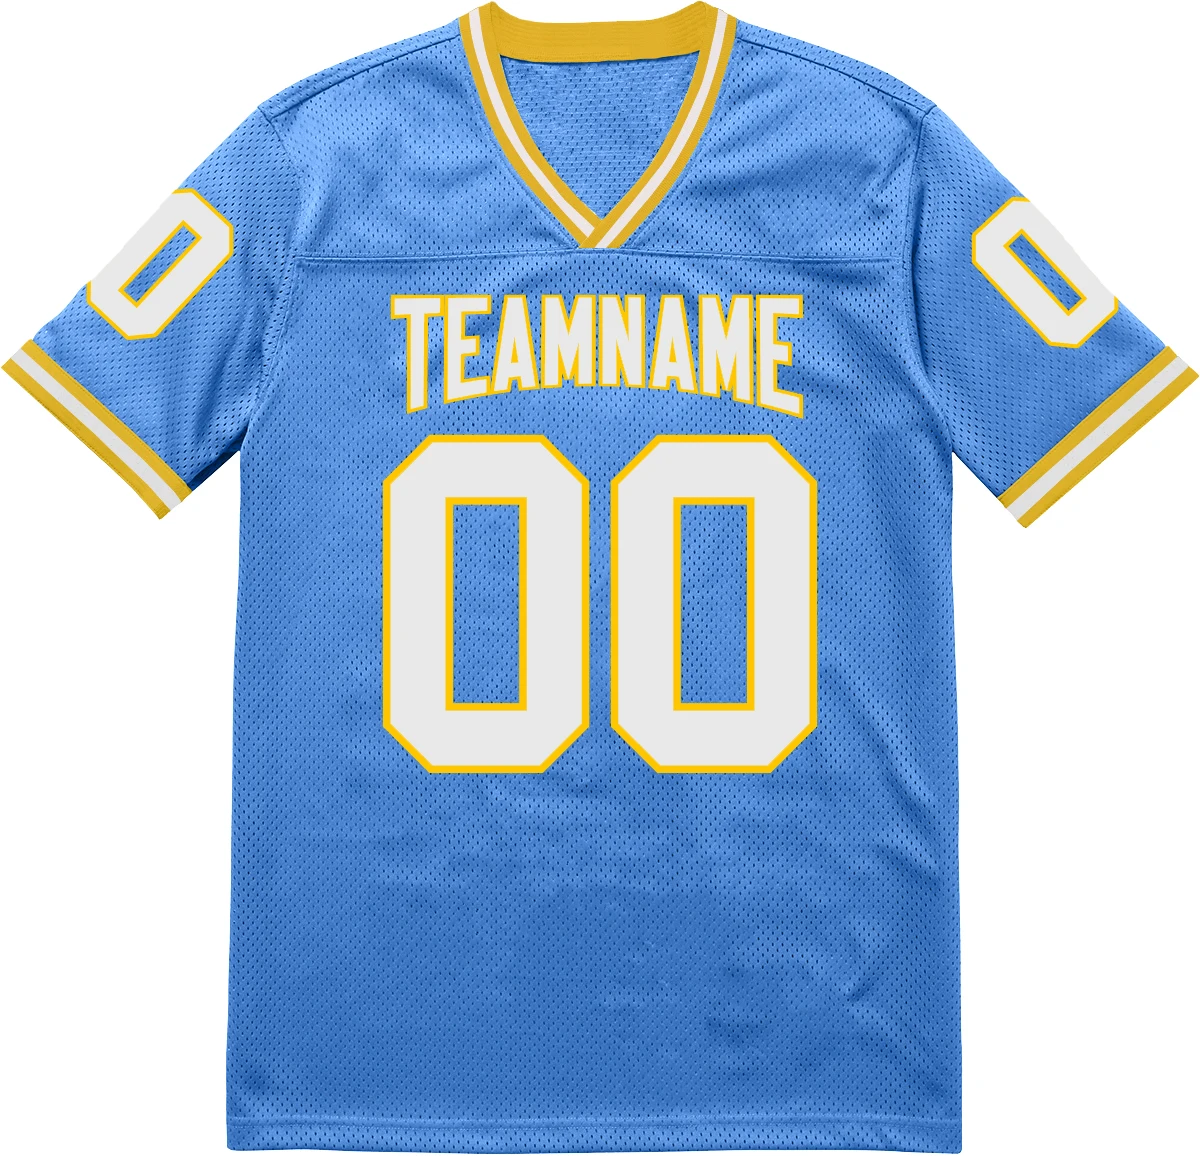 Customized Football Jersey Print Team Name/Number Personalized D